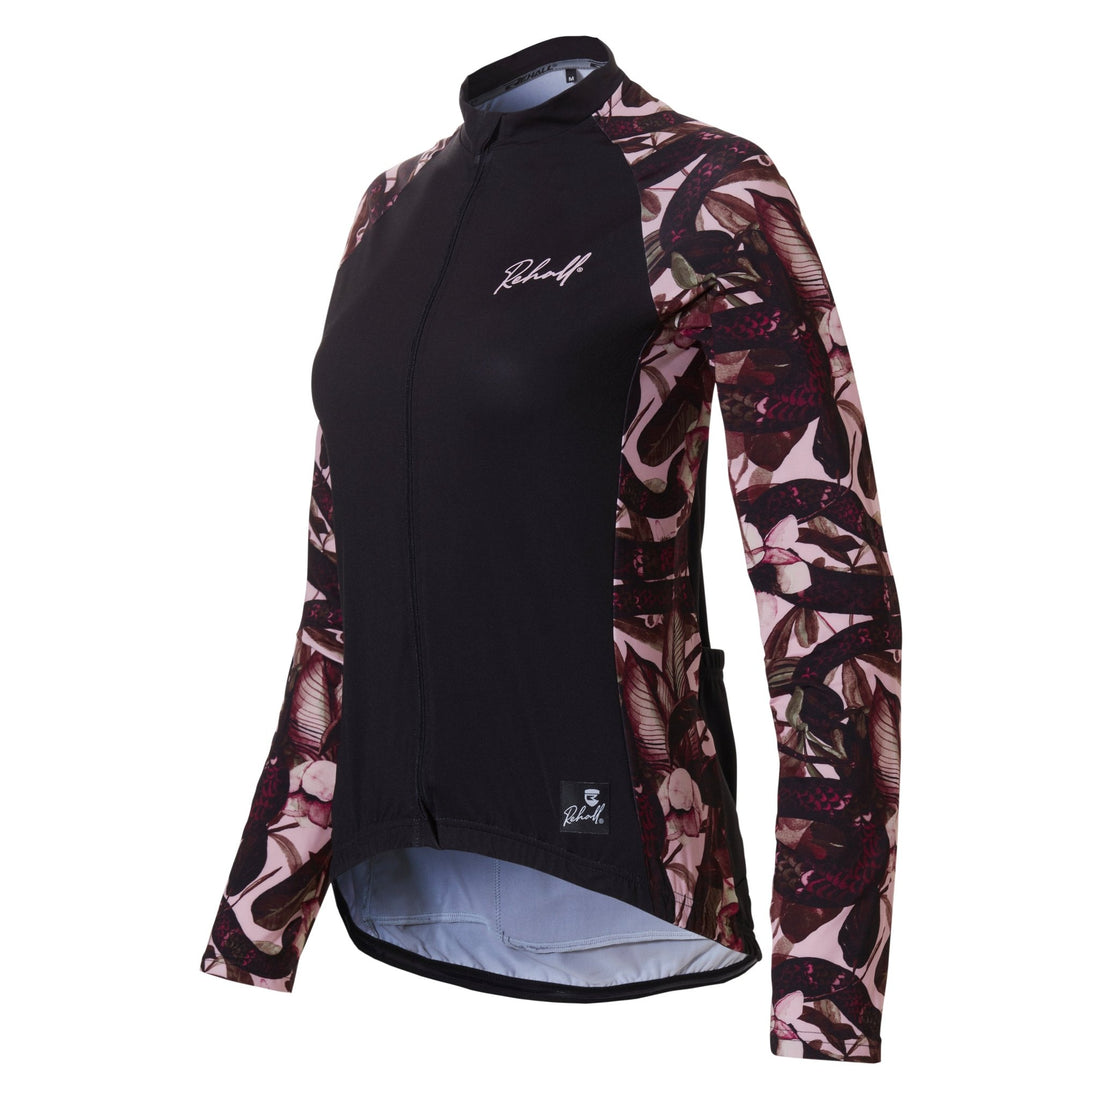 SABY-R Womens Cycling T-shirt Longsleeve - World of Alps